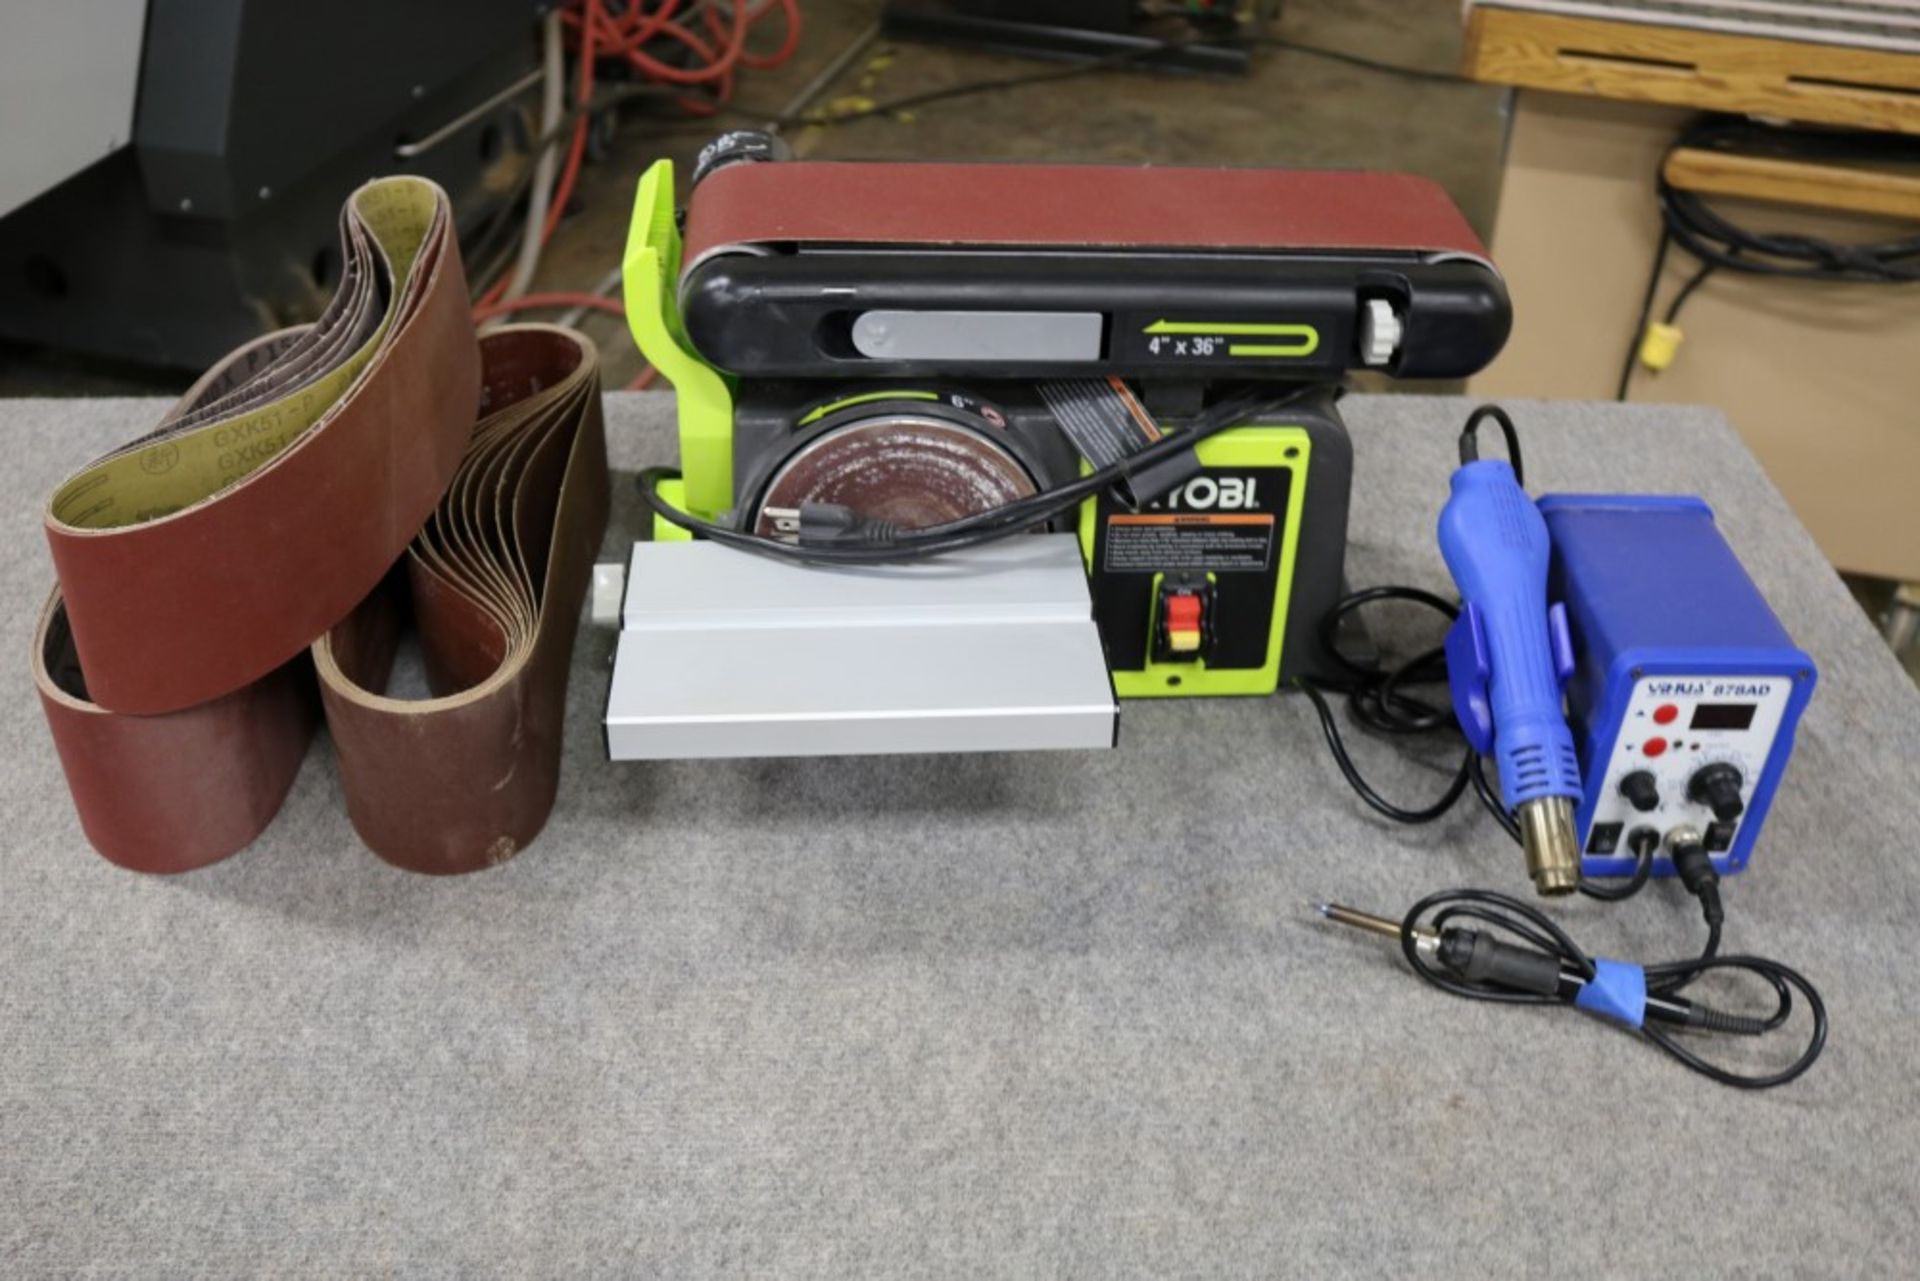 Ryobi 4" x 6" Belt and Disc Sander with Extra New Sanding Belts, also YiHua 878 AD- SMD ReWork - Image 6 of 9